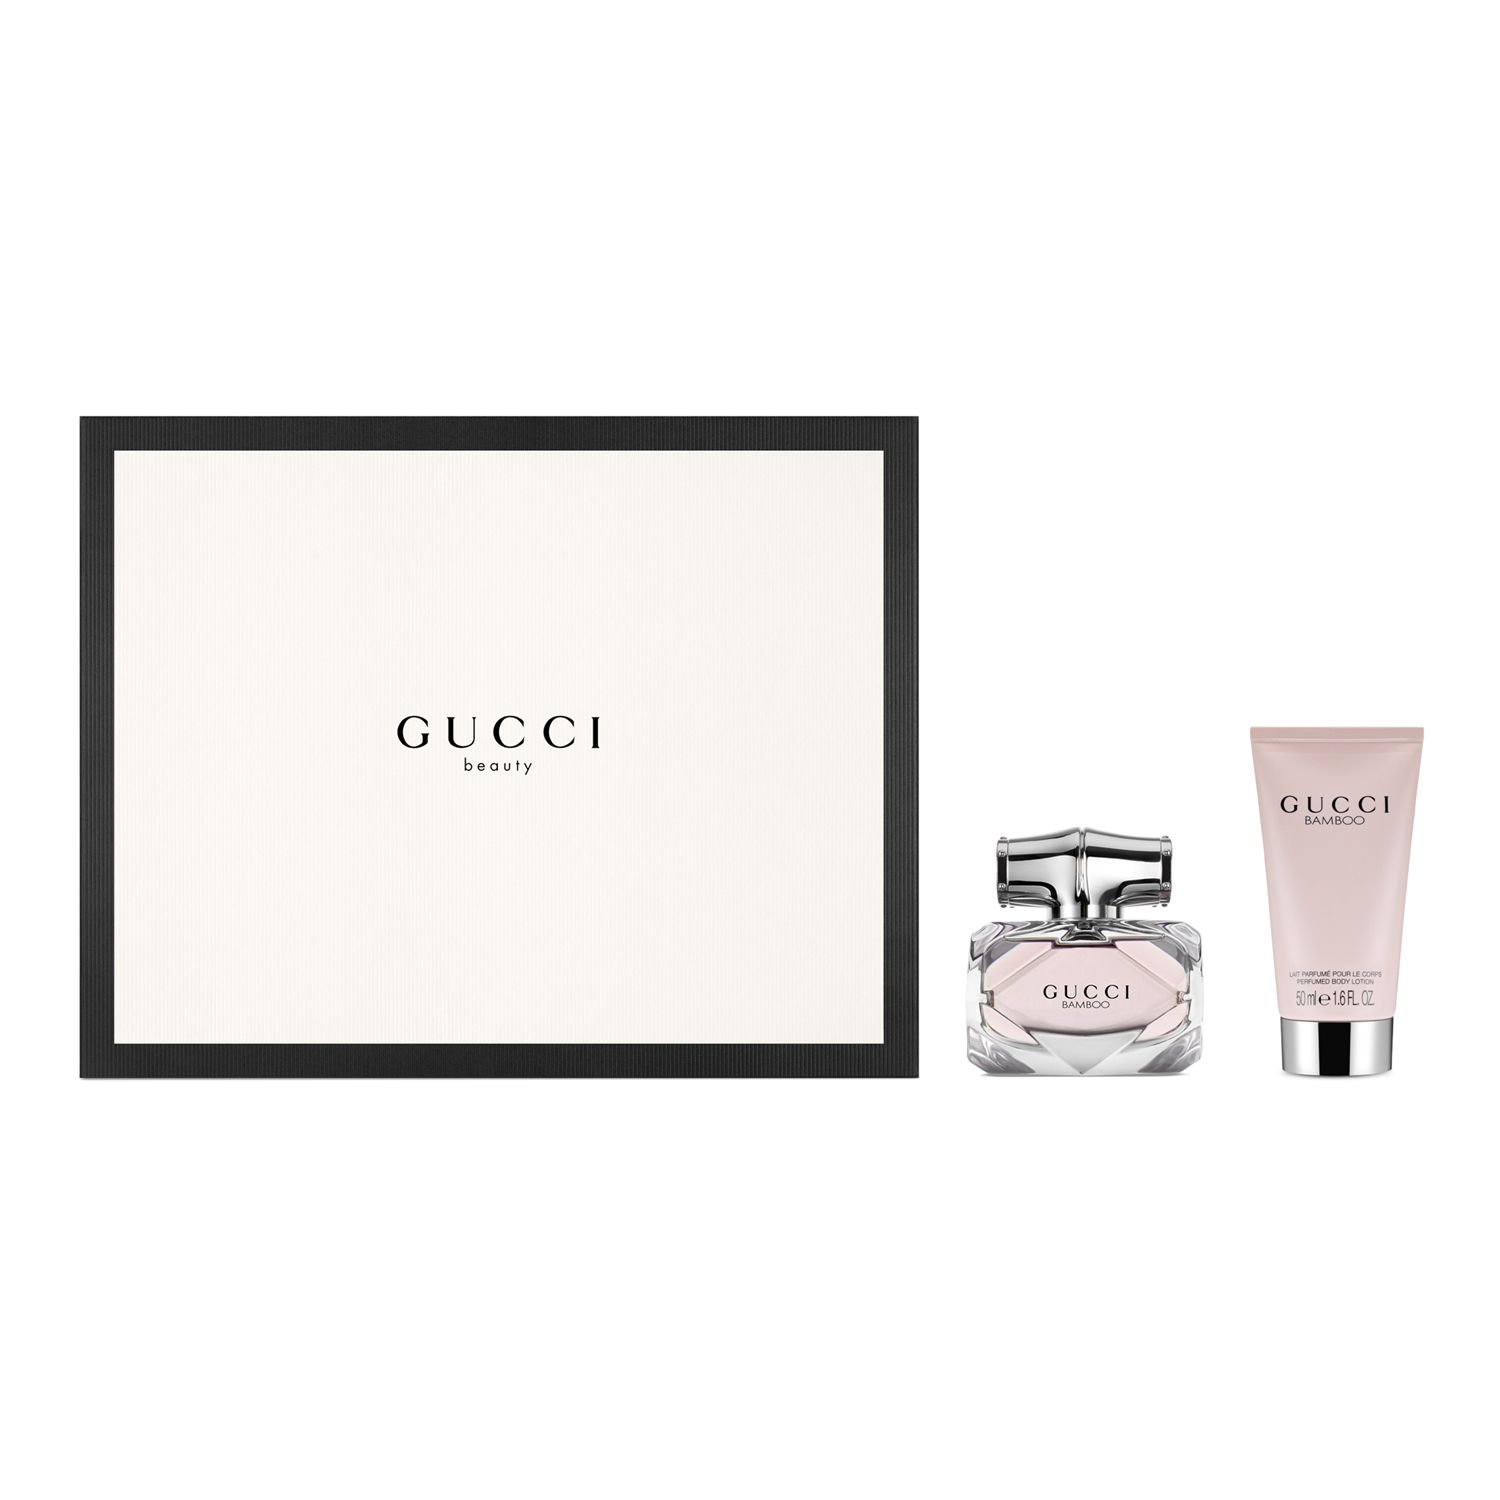 Gucci Bamboo Women's Gift Set ($104 Value)